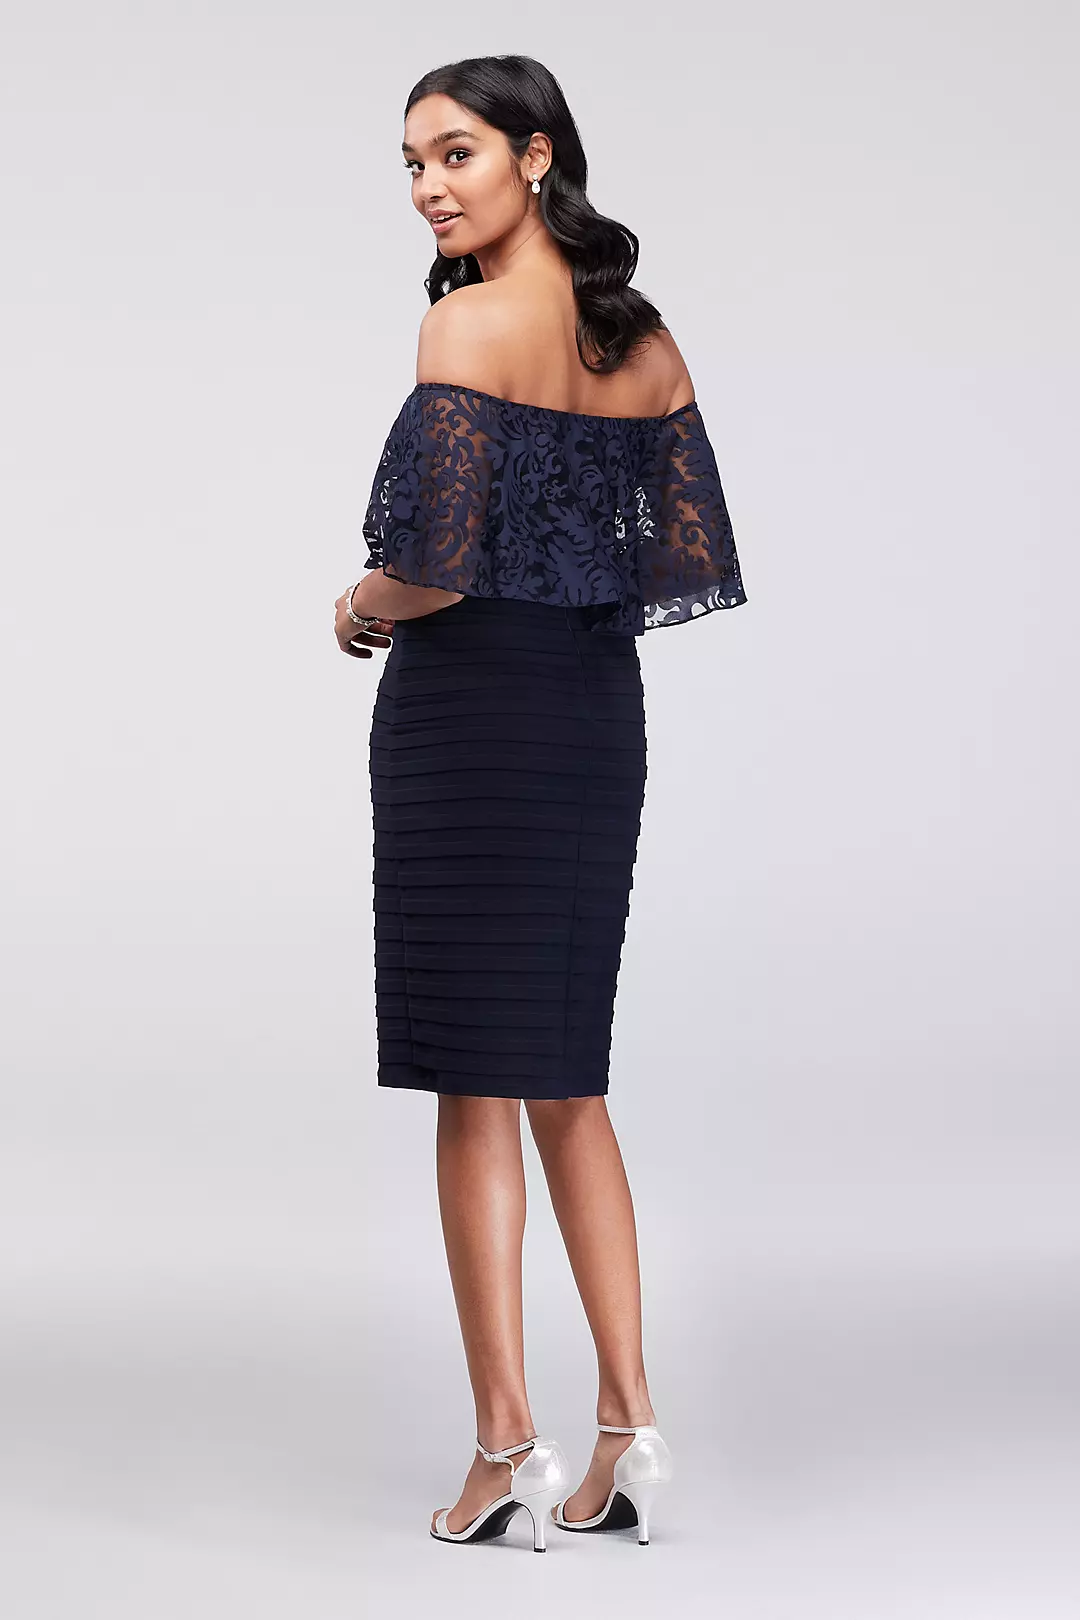 Short Tiered Off-the-Shoulder Body Con Dress  Image 2